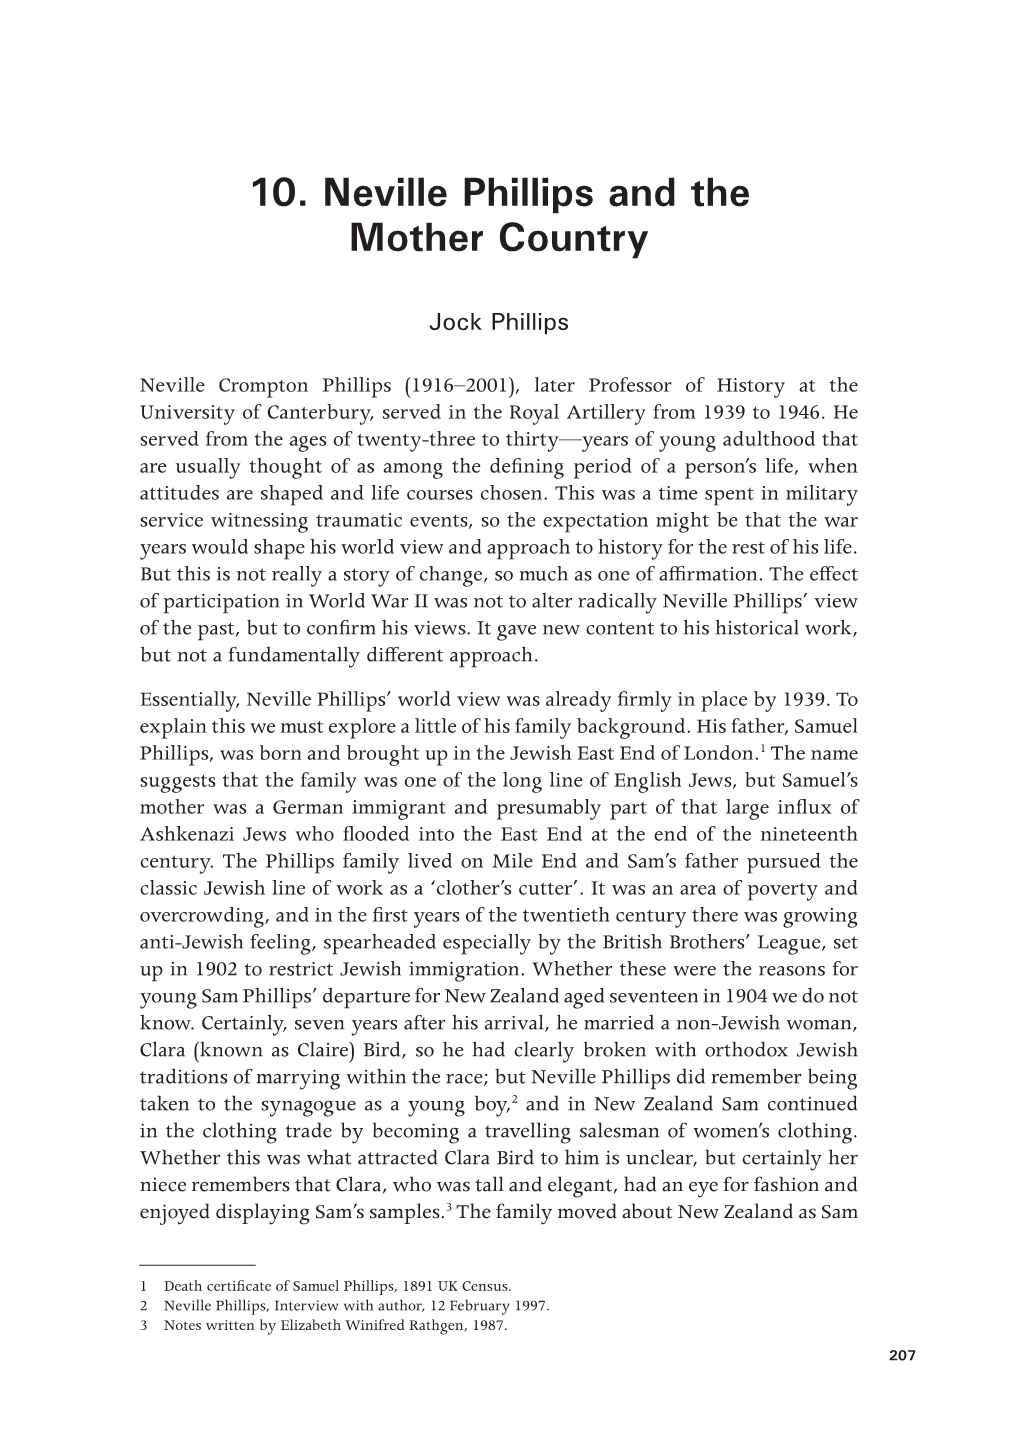 Neville Phillips and the Mother Country